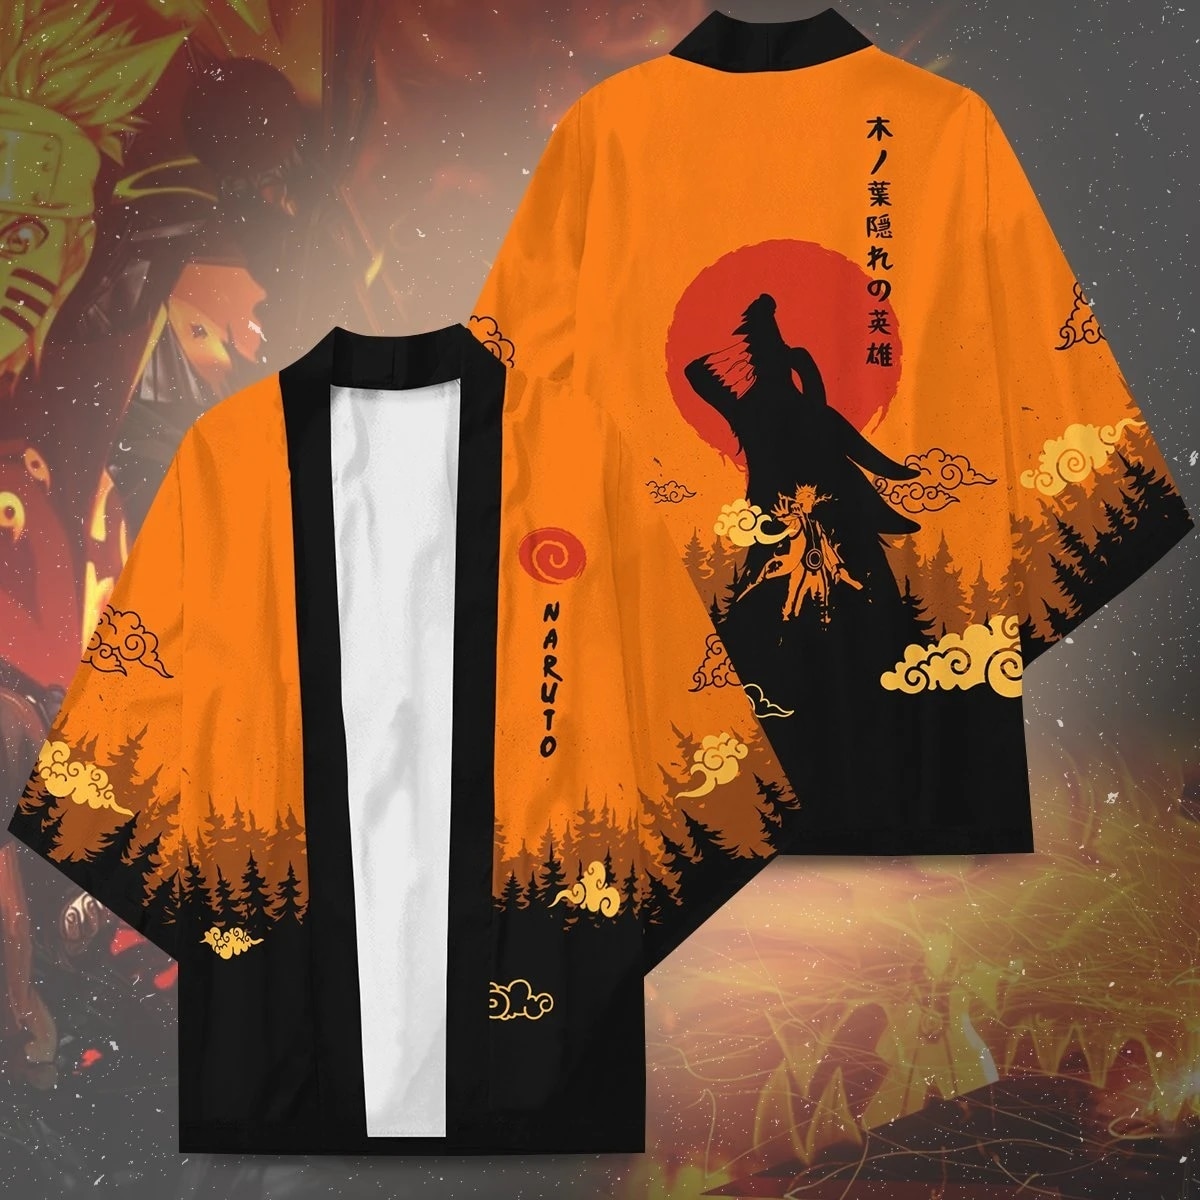 Naruto – Different Characters and Clans Themed Cloak Cardigans (4 Designs) Jackets & Coats